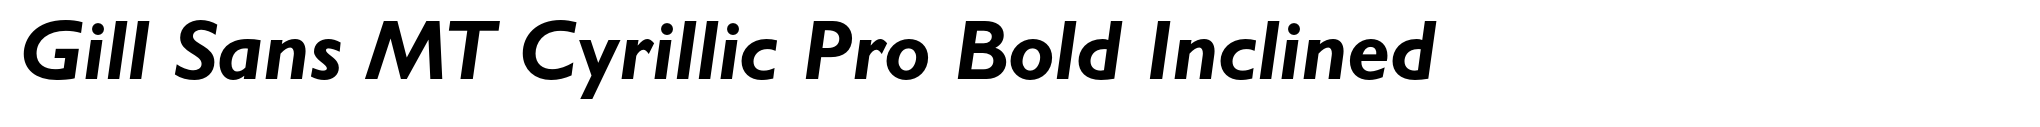 Gill Sans MT Cyrillic Pro Bold Inclined image